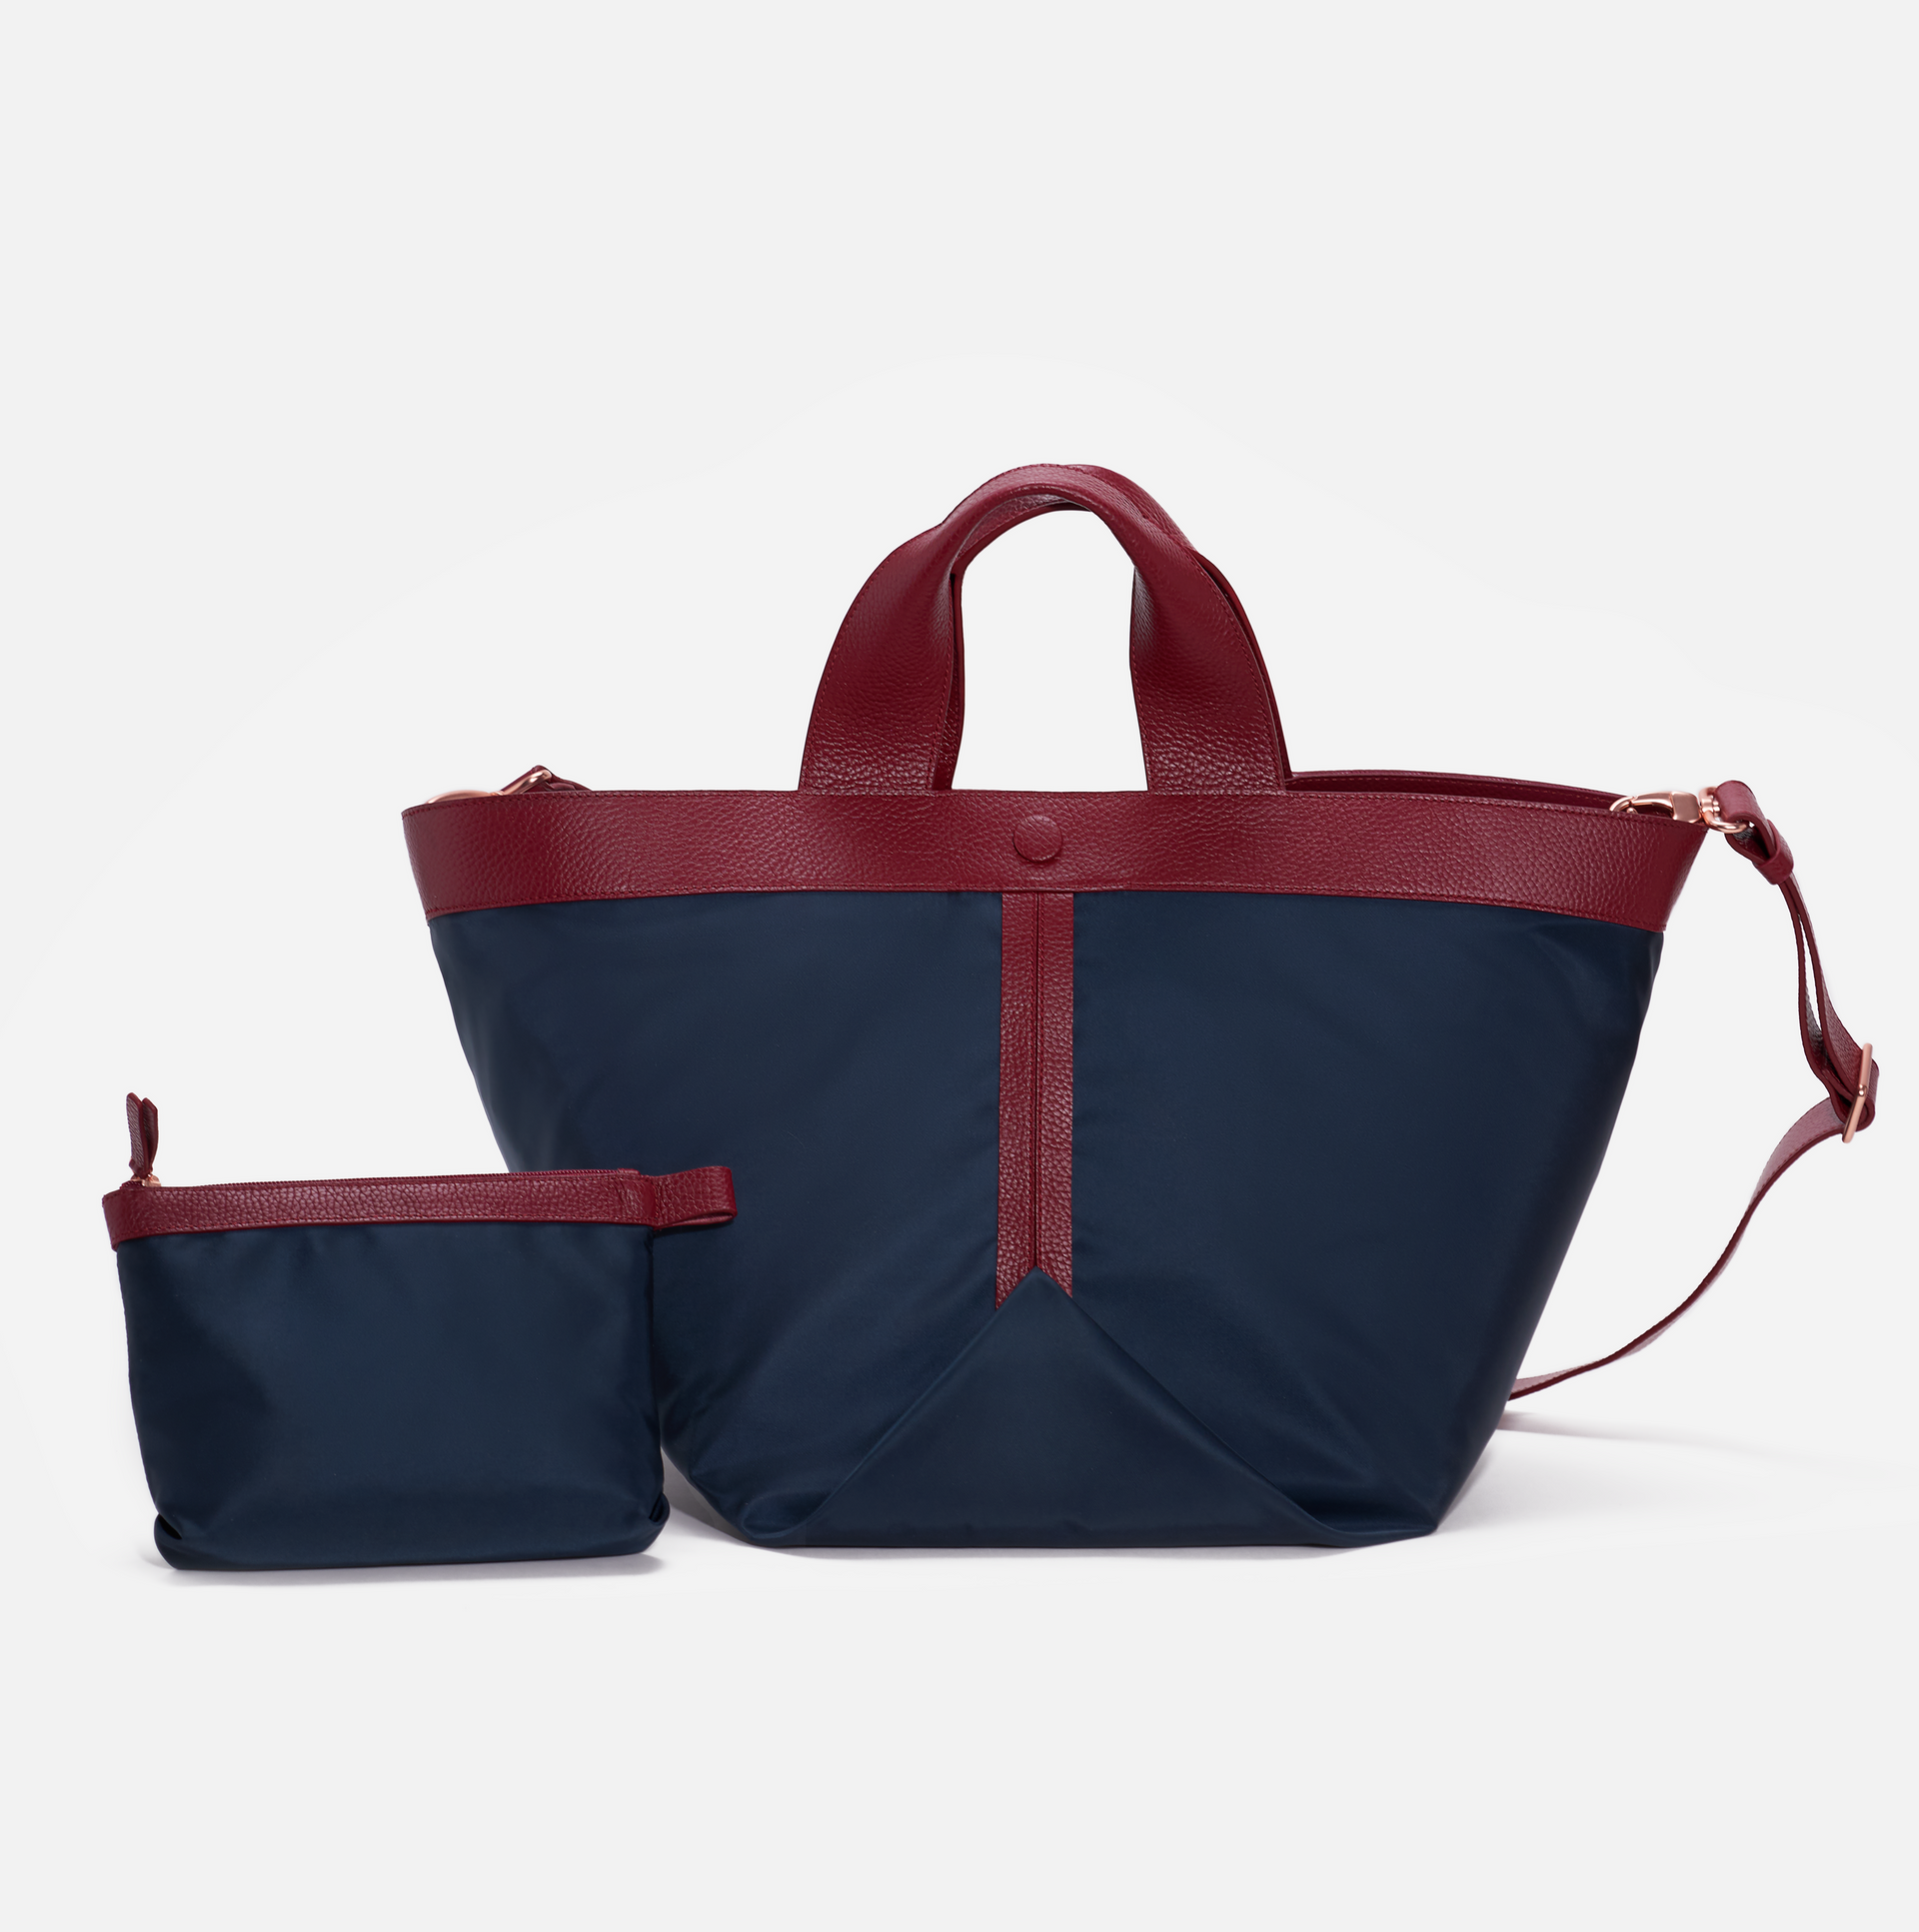 Gusset large nylon tote with pebble leather trim in navy / burgundy